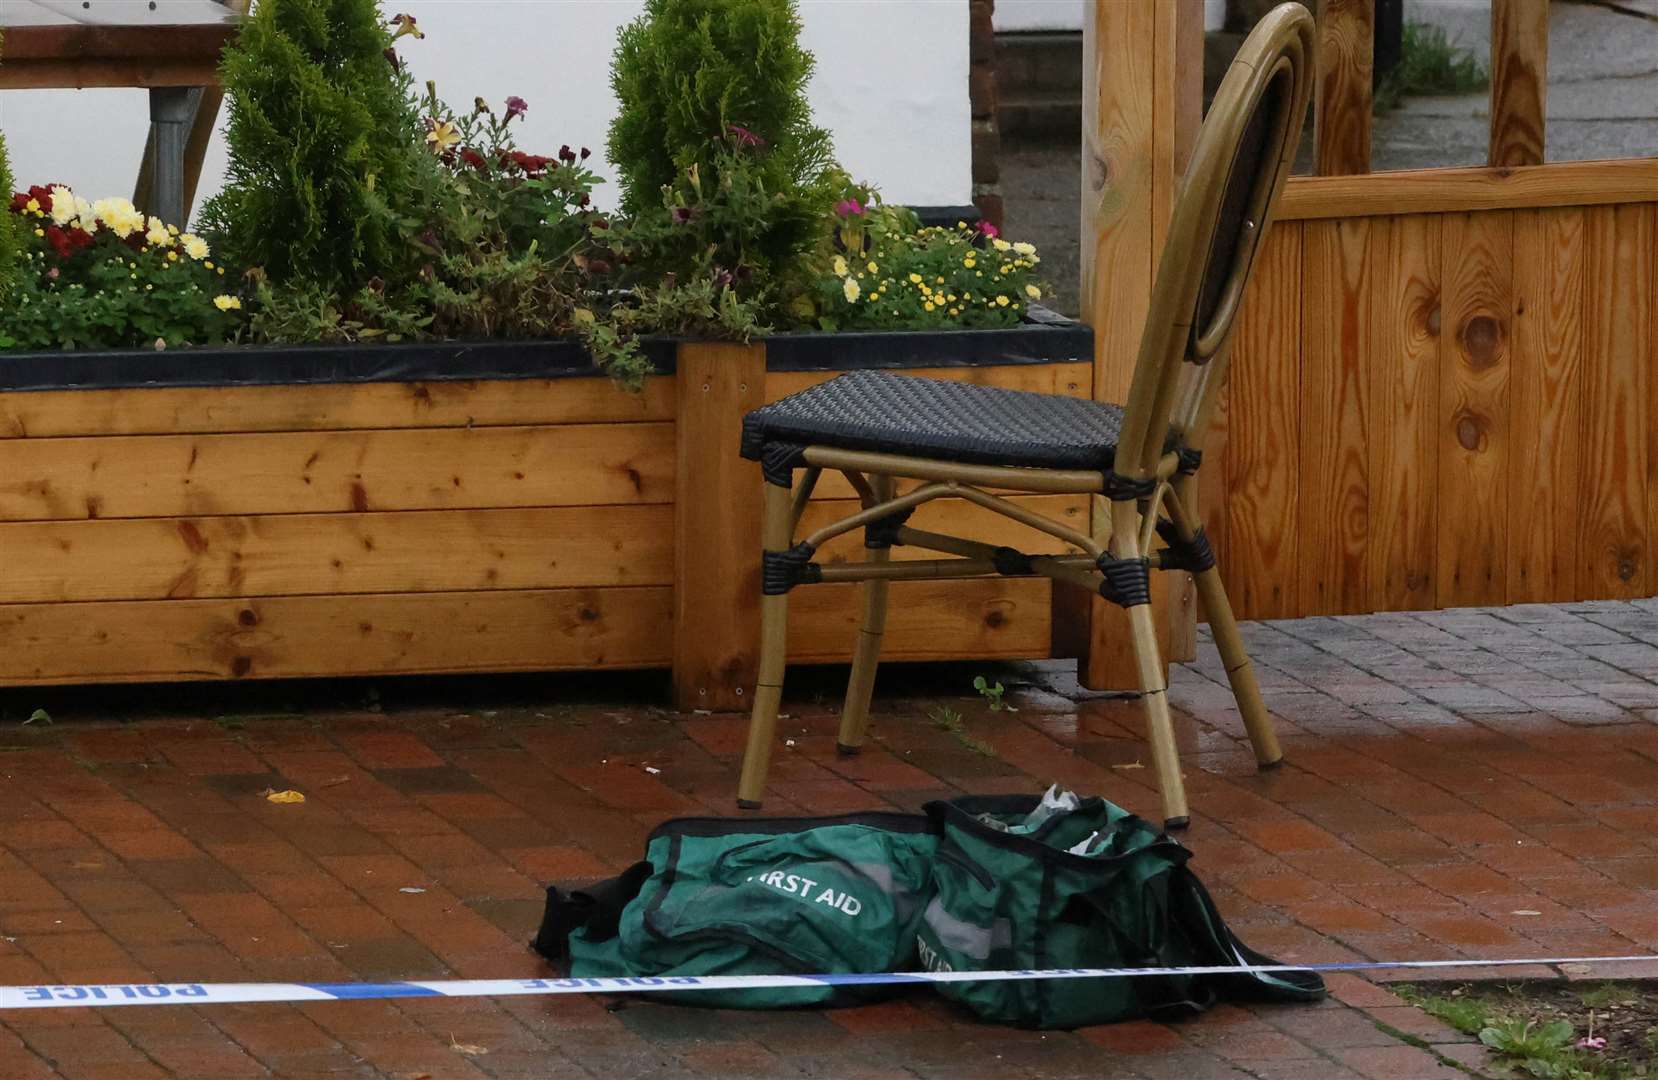 First aid bag is next to a chair outside the pub. Picture: UKNIP